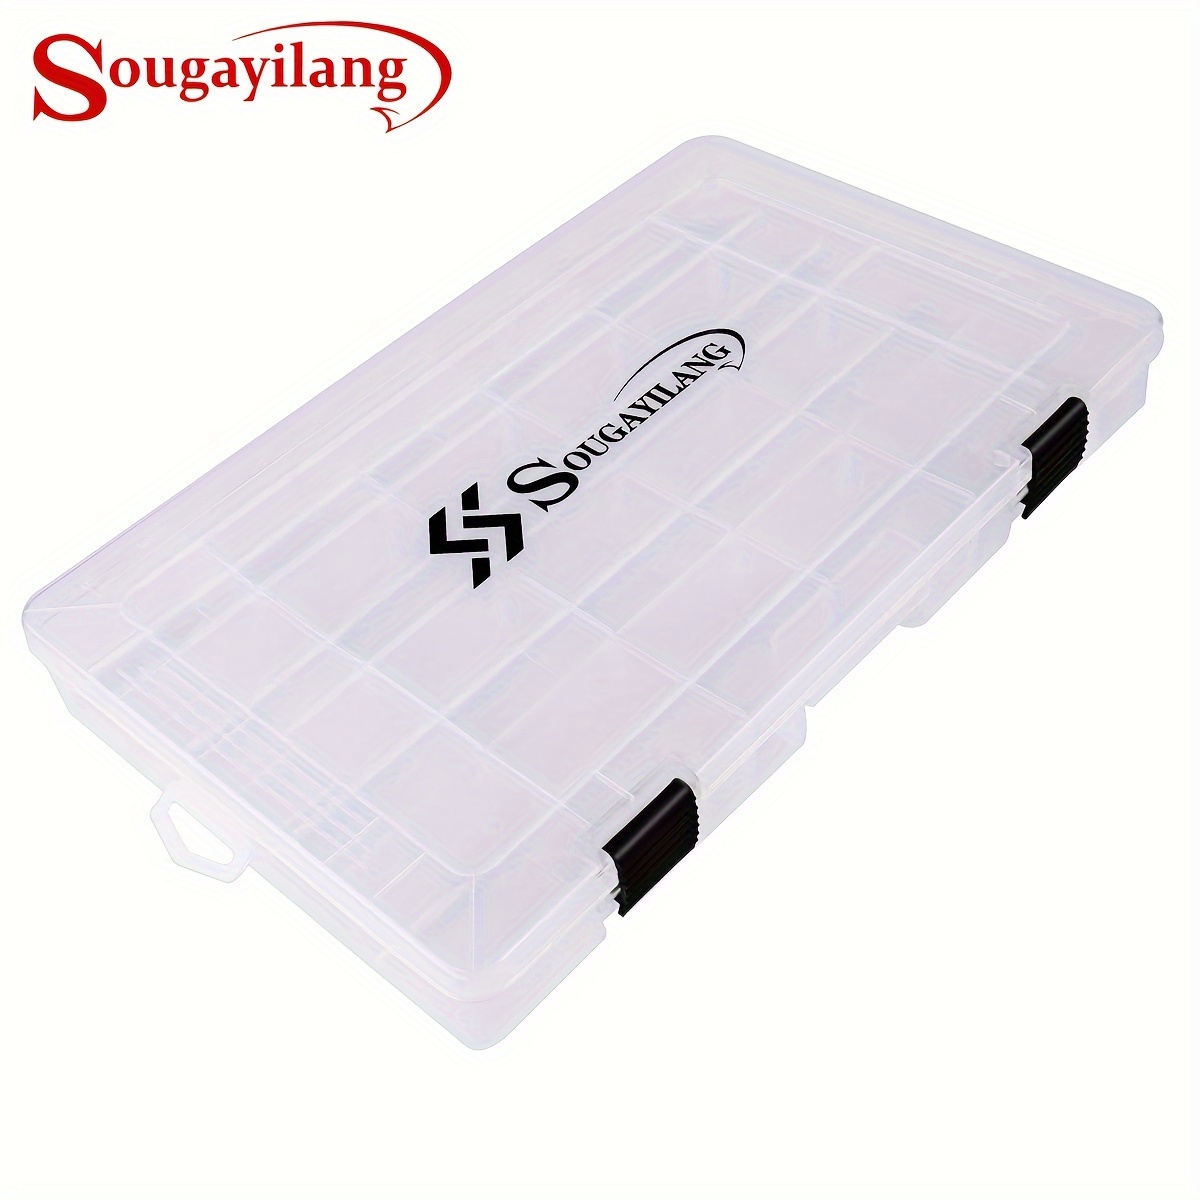 Sougayilang Fishing Bait Container - Plastic Lure Sorting Box With